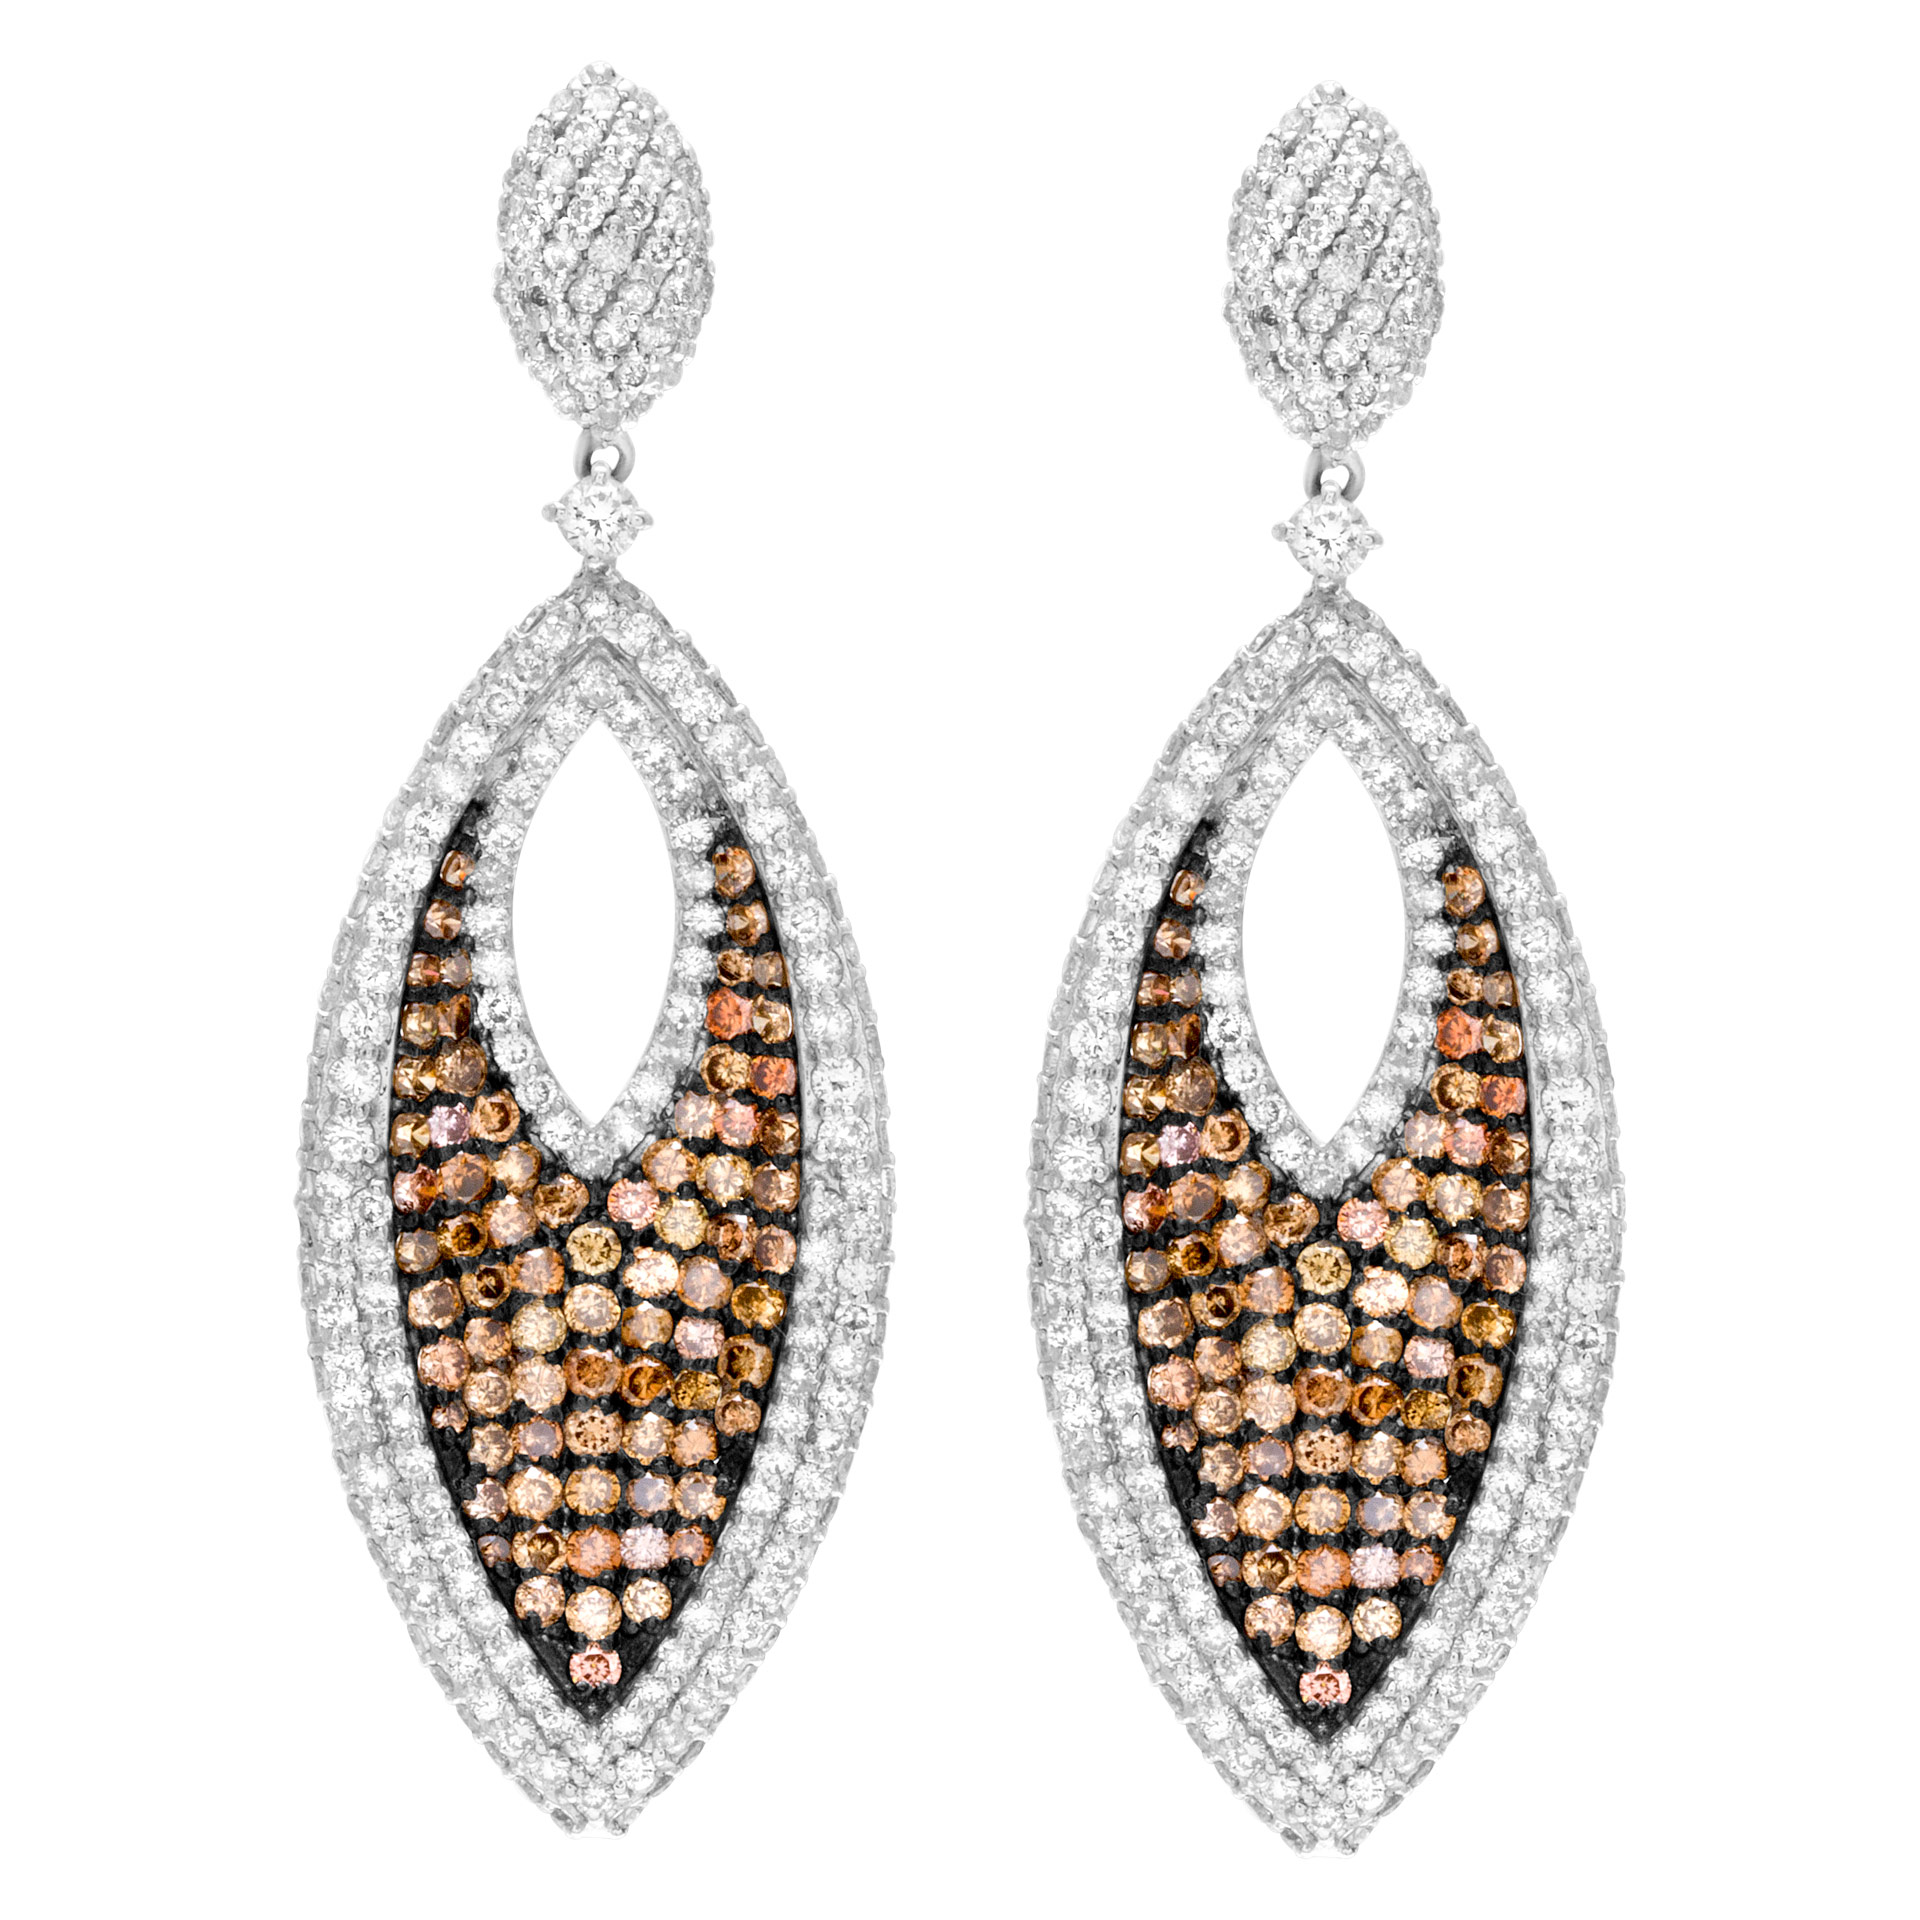 Cognac and white diamond drop earrings. total diamond weight 10.11 carats image 1